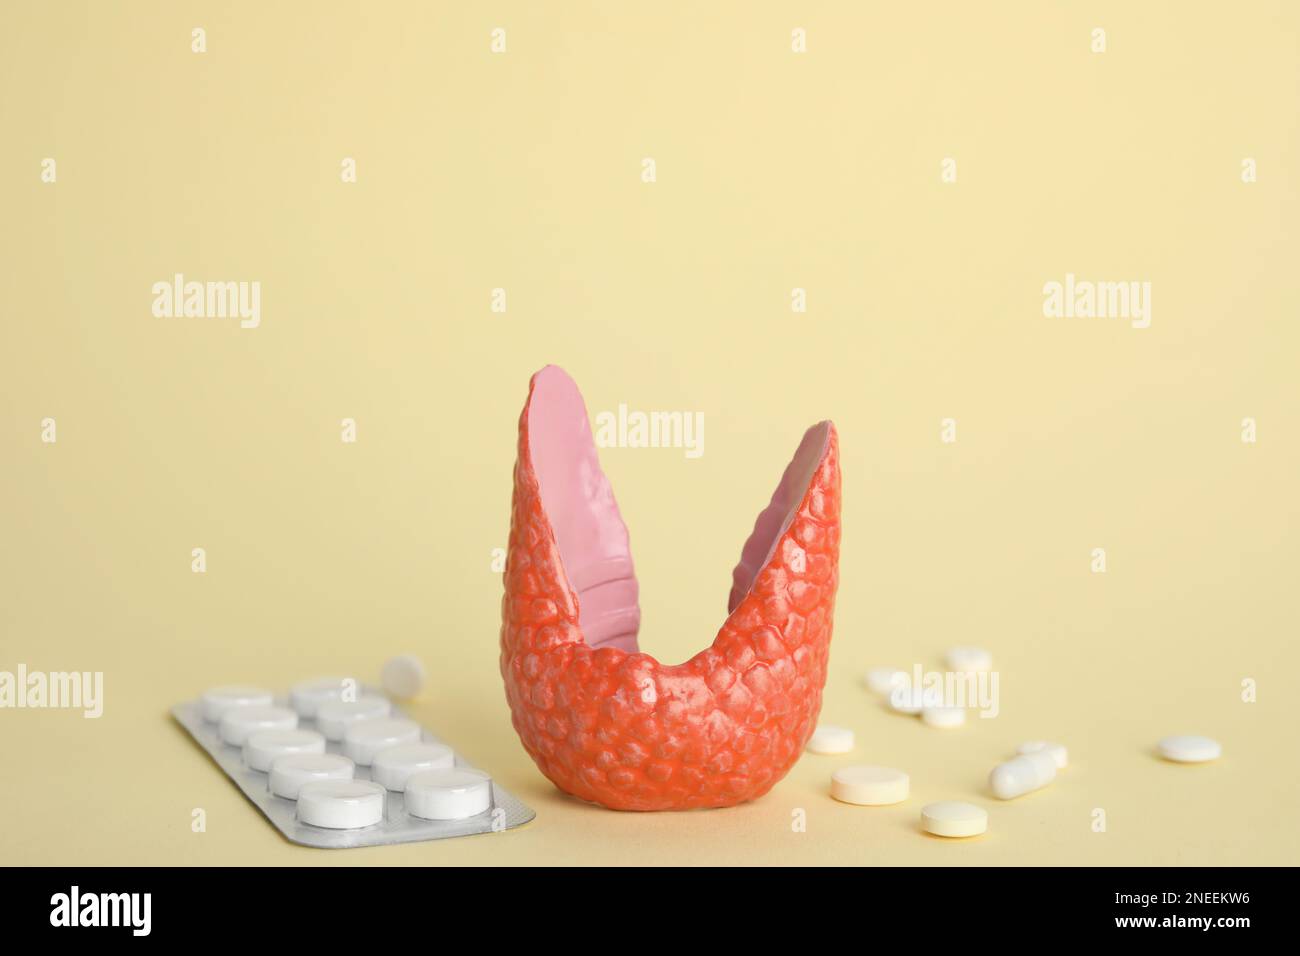 Plastic model of healthy thyroid and pills on beige background Stock Photo